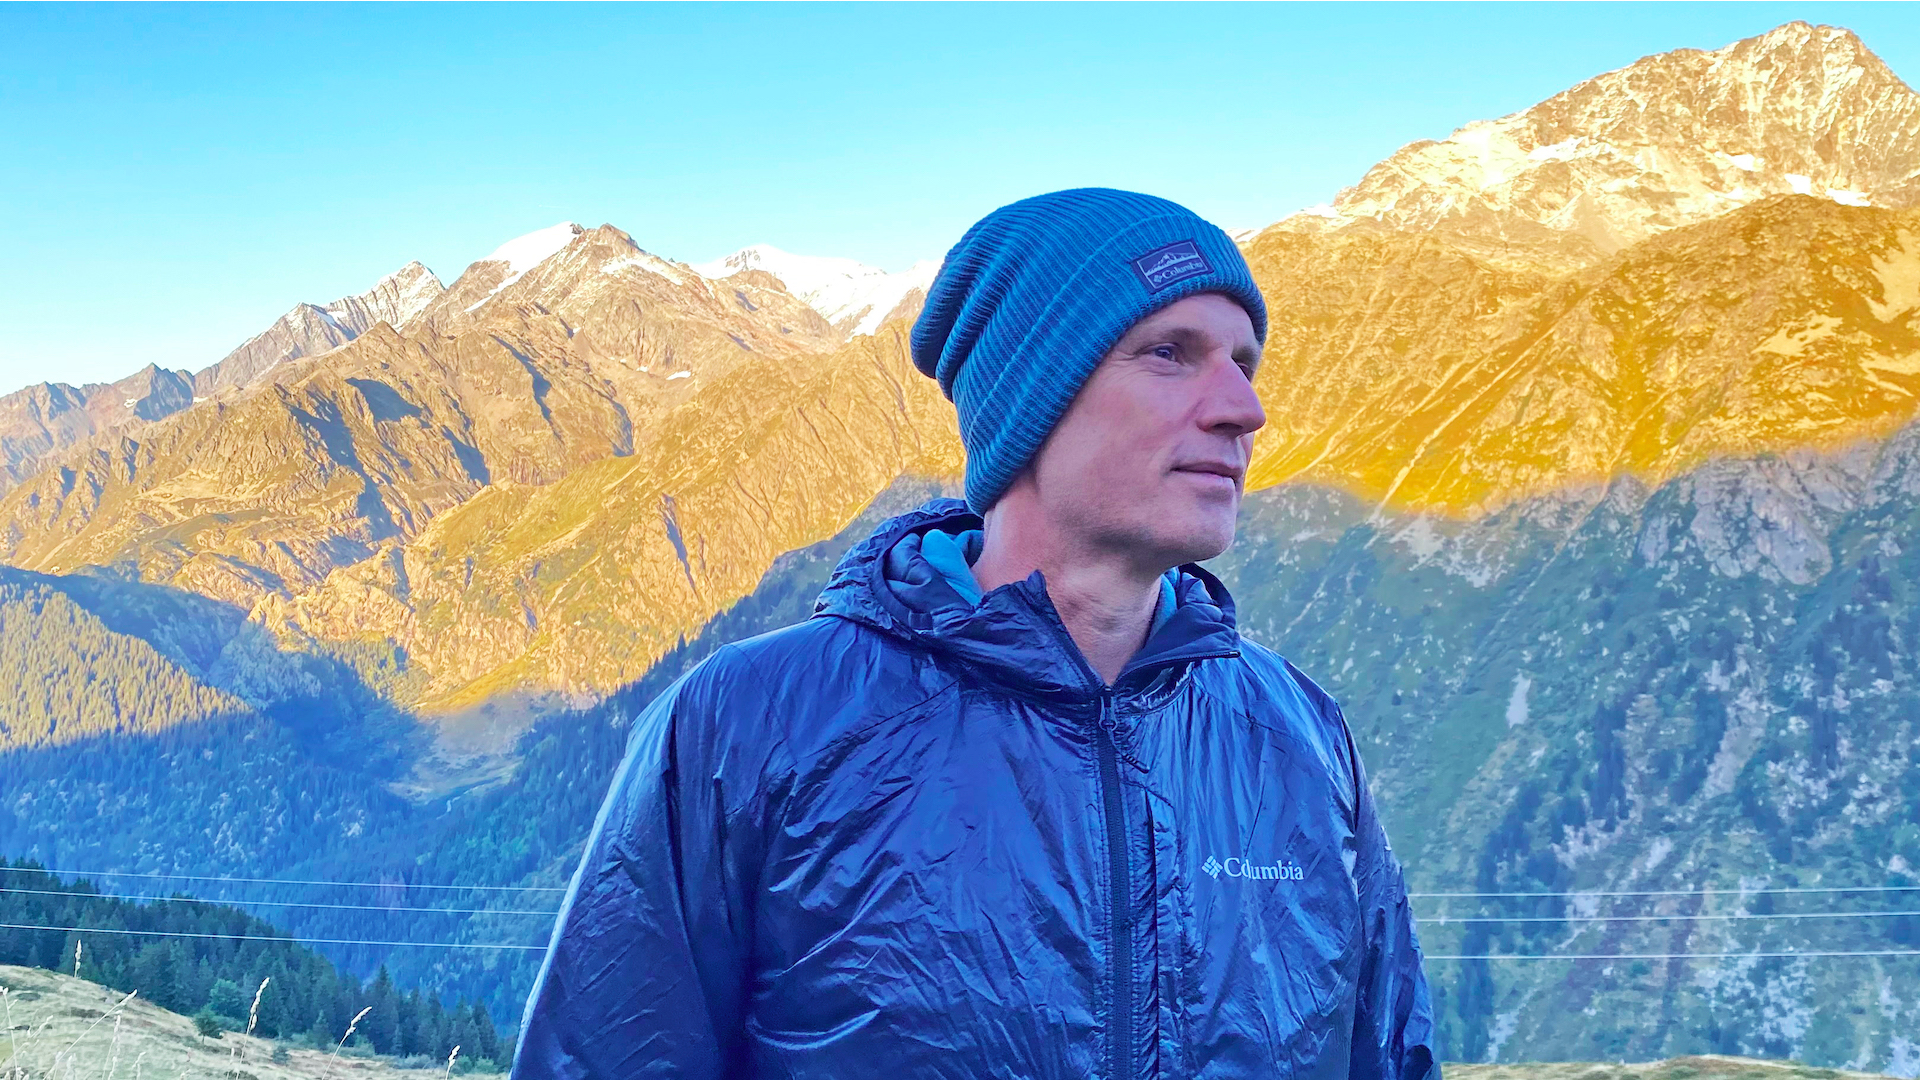 Columbia Lost Lager II Beanie review: a chunky, cozy…